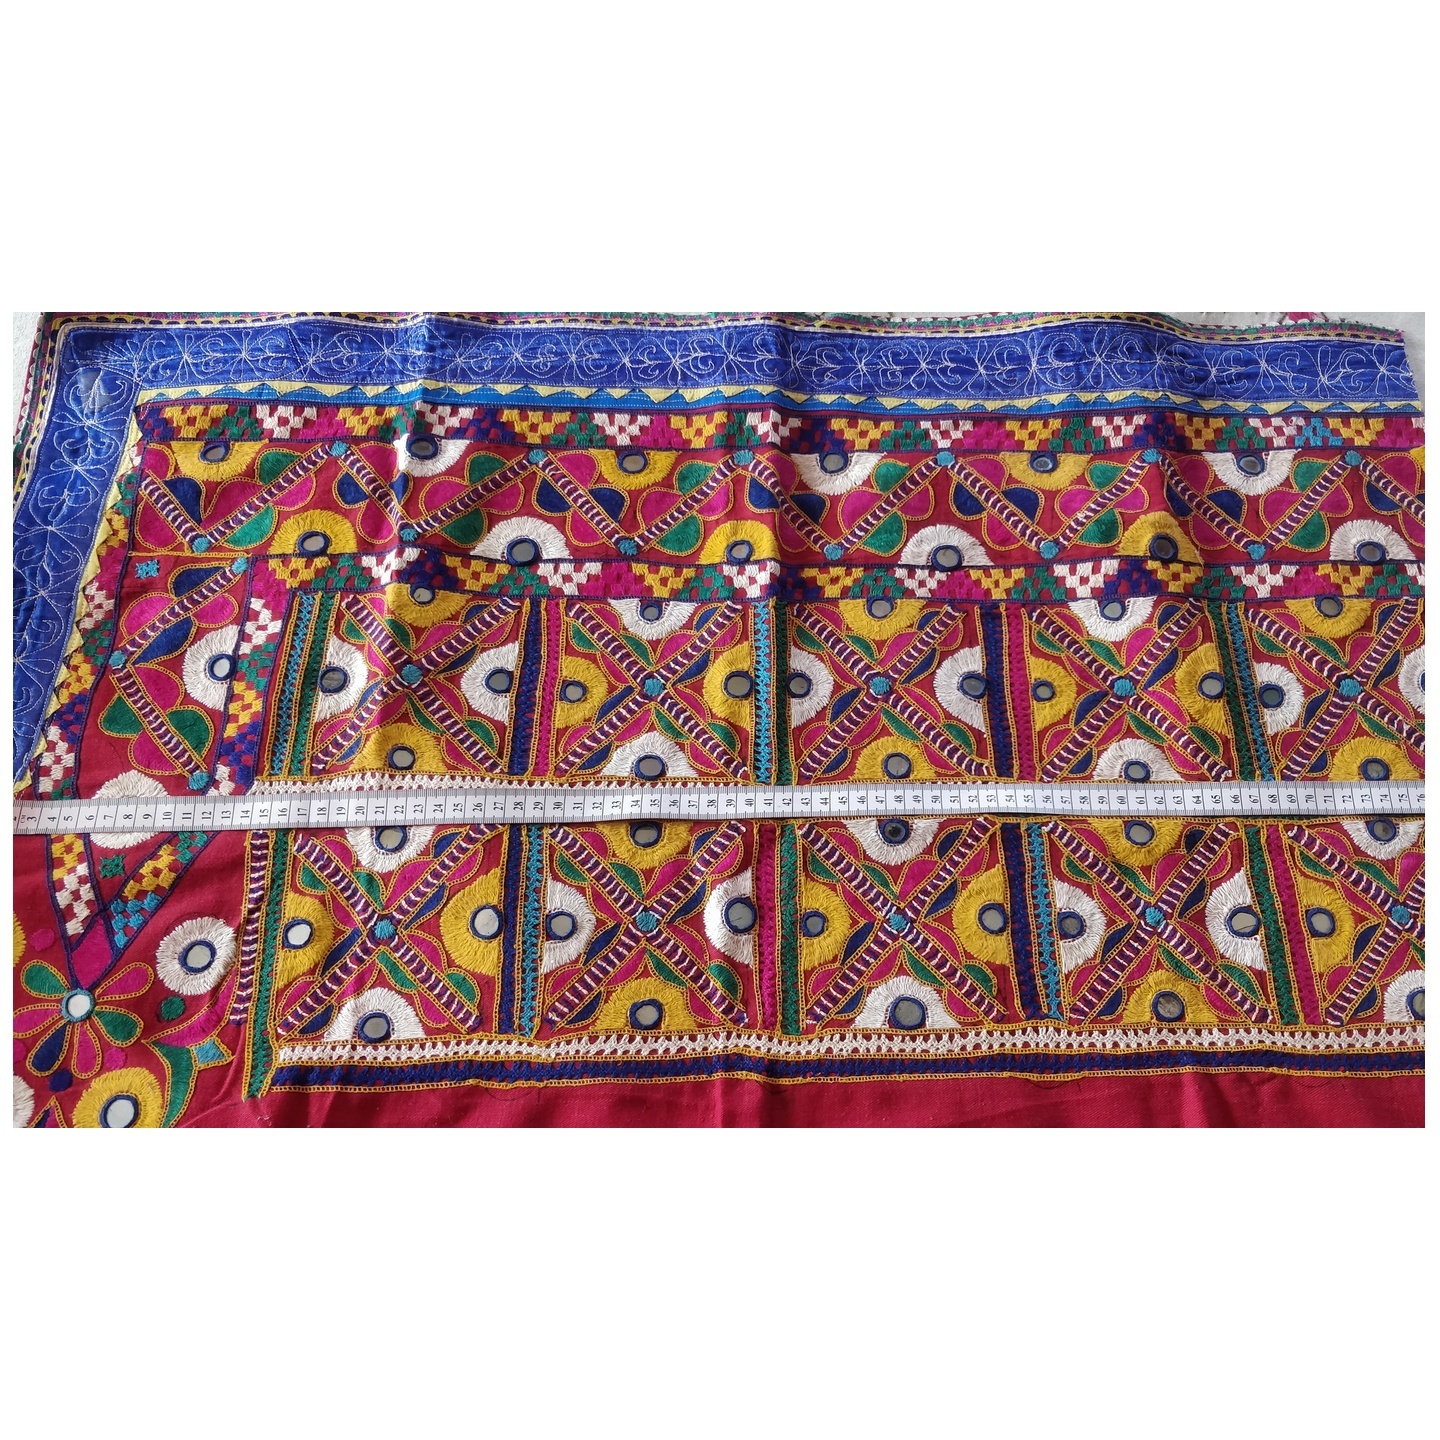 DKW05 - Kutch work hand embroidered Fabric